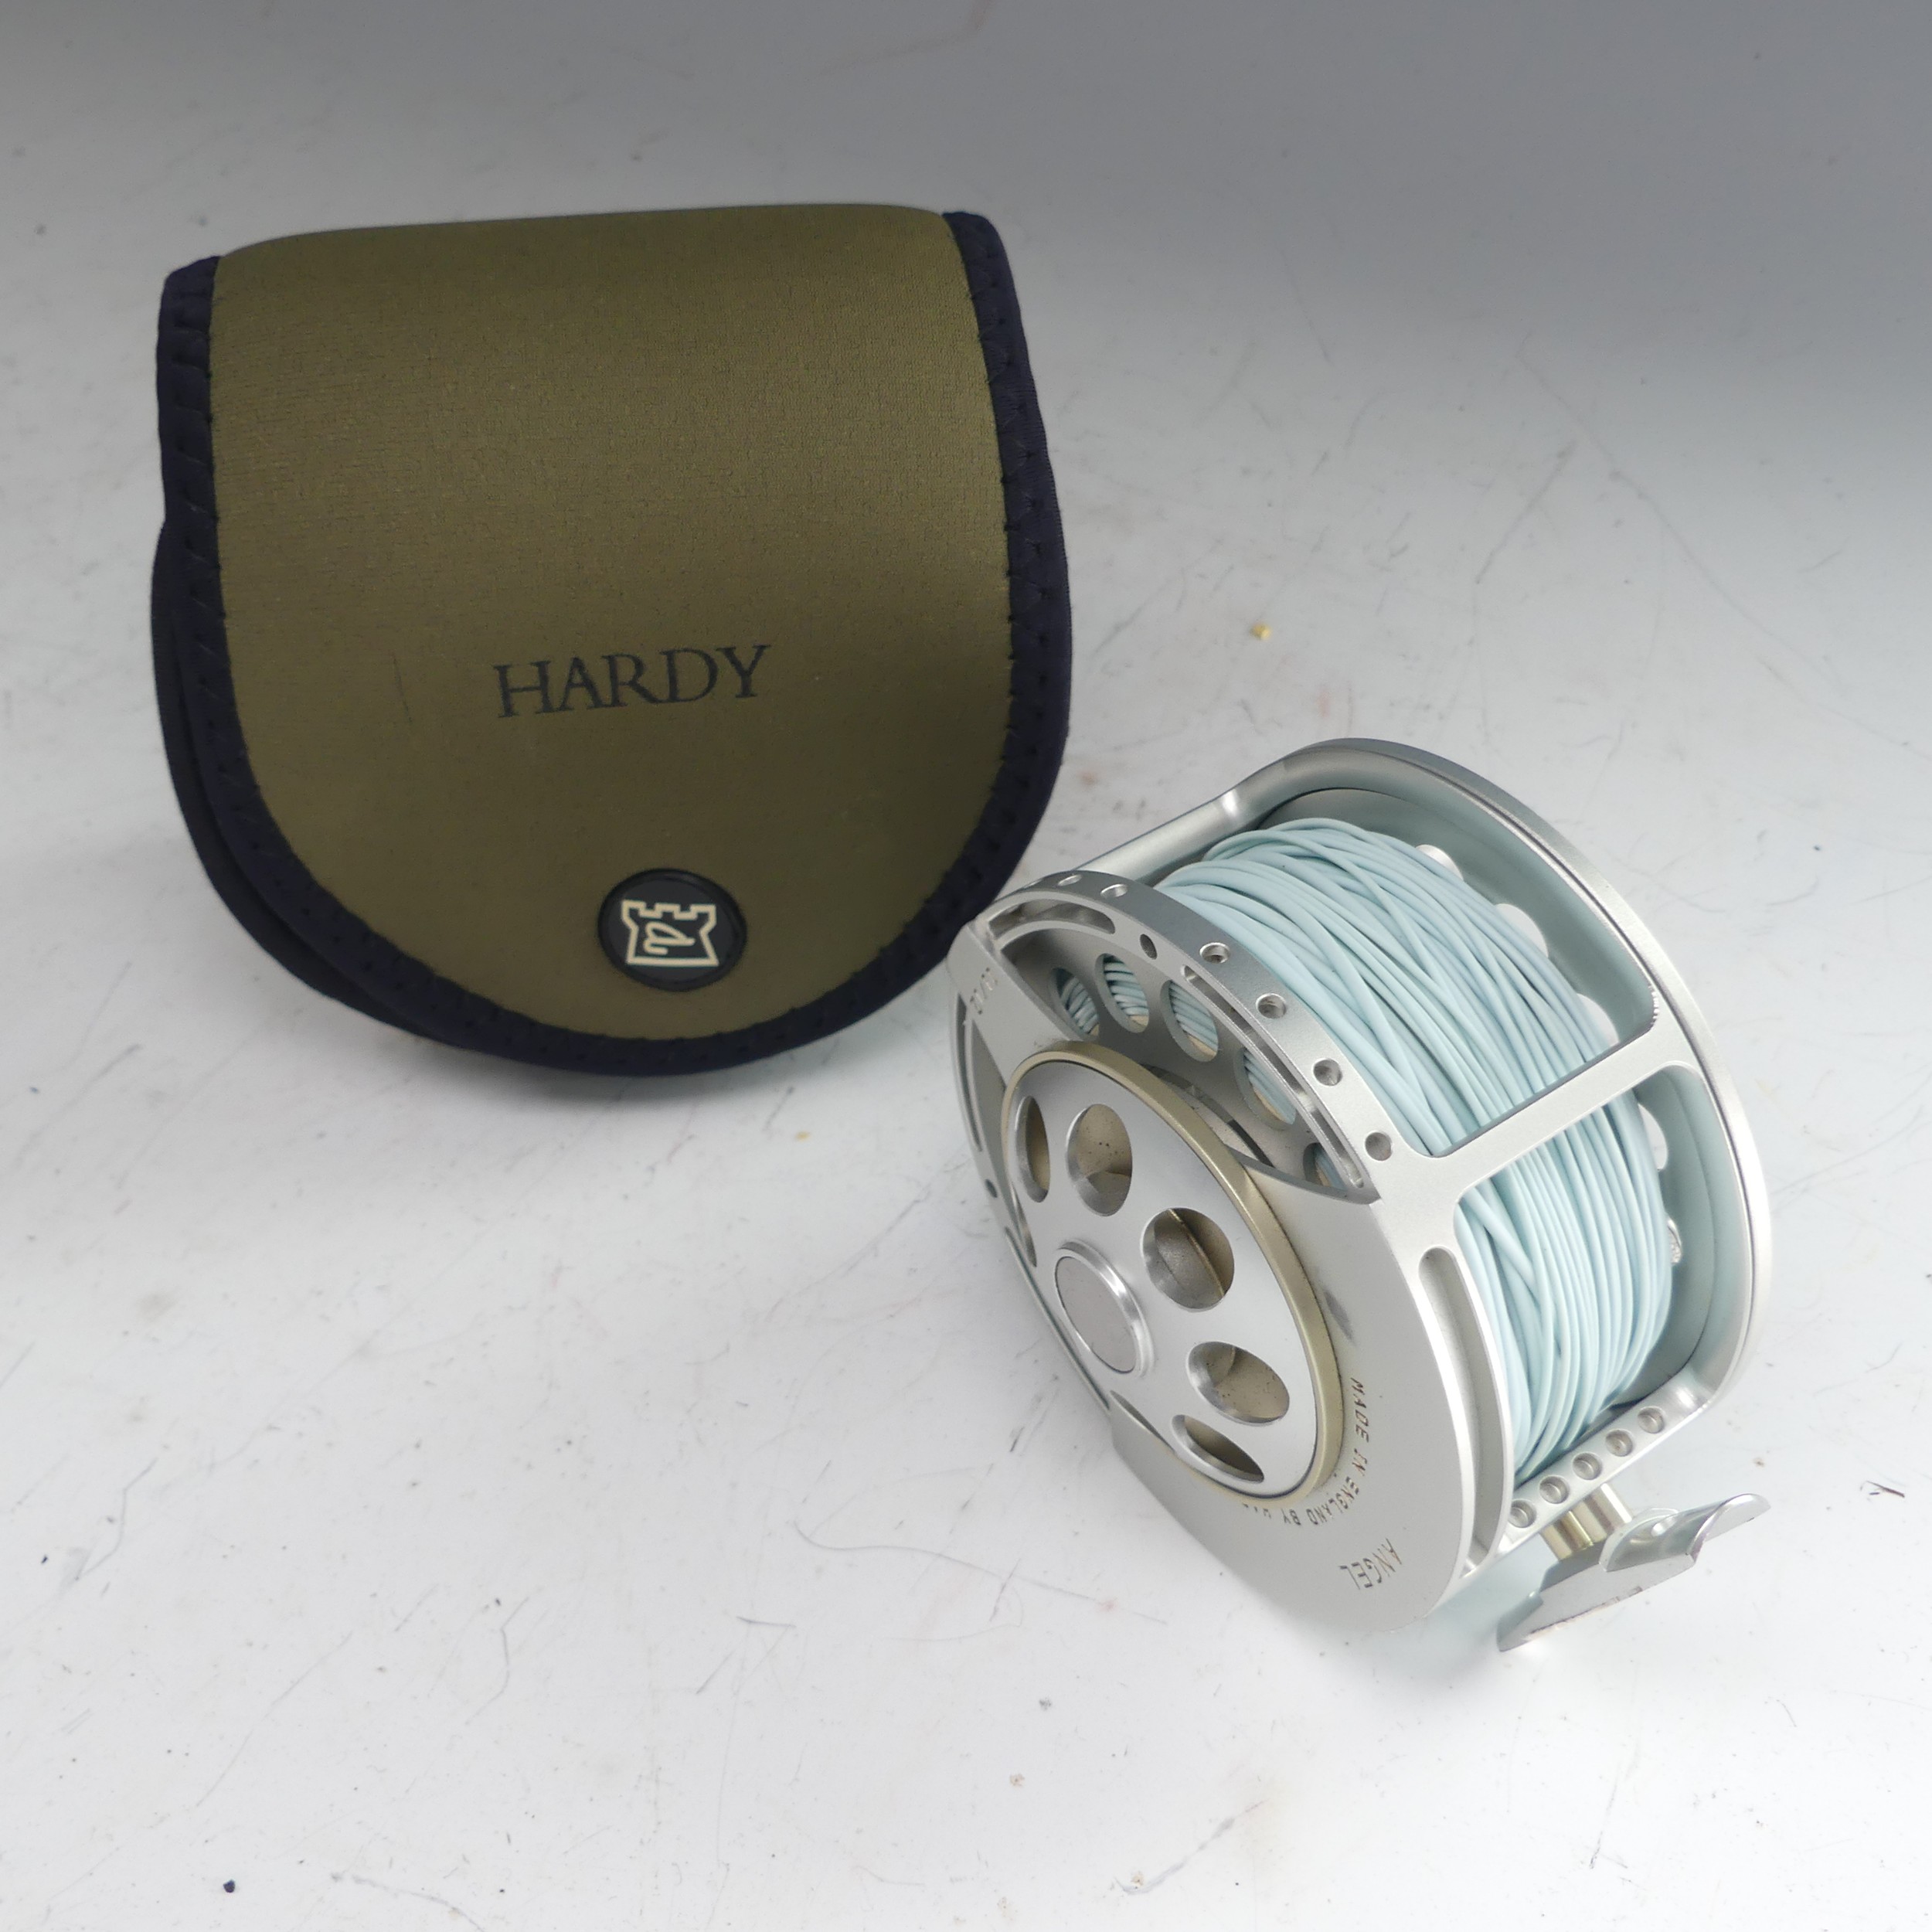 A Hardy Angel 11/12 fishing Reel, no. A26697, with Hardy pouch, 11.5cm diameter. - Image 8 of 8